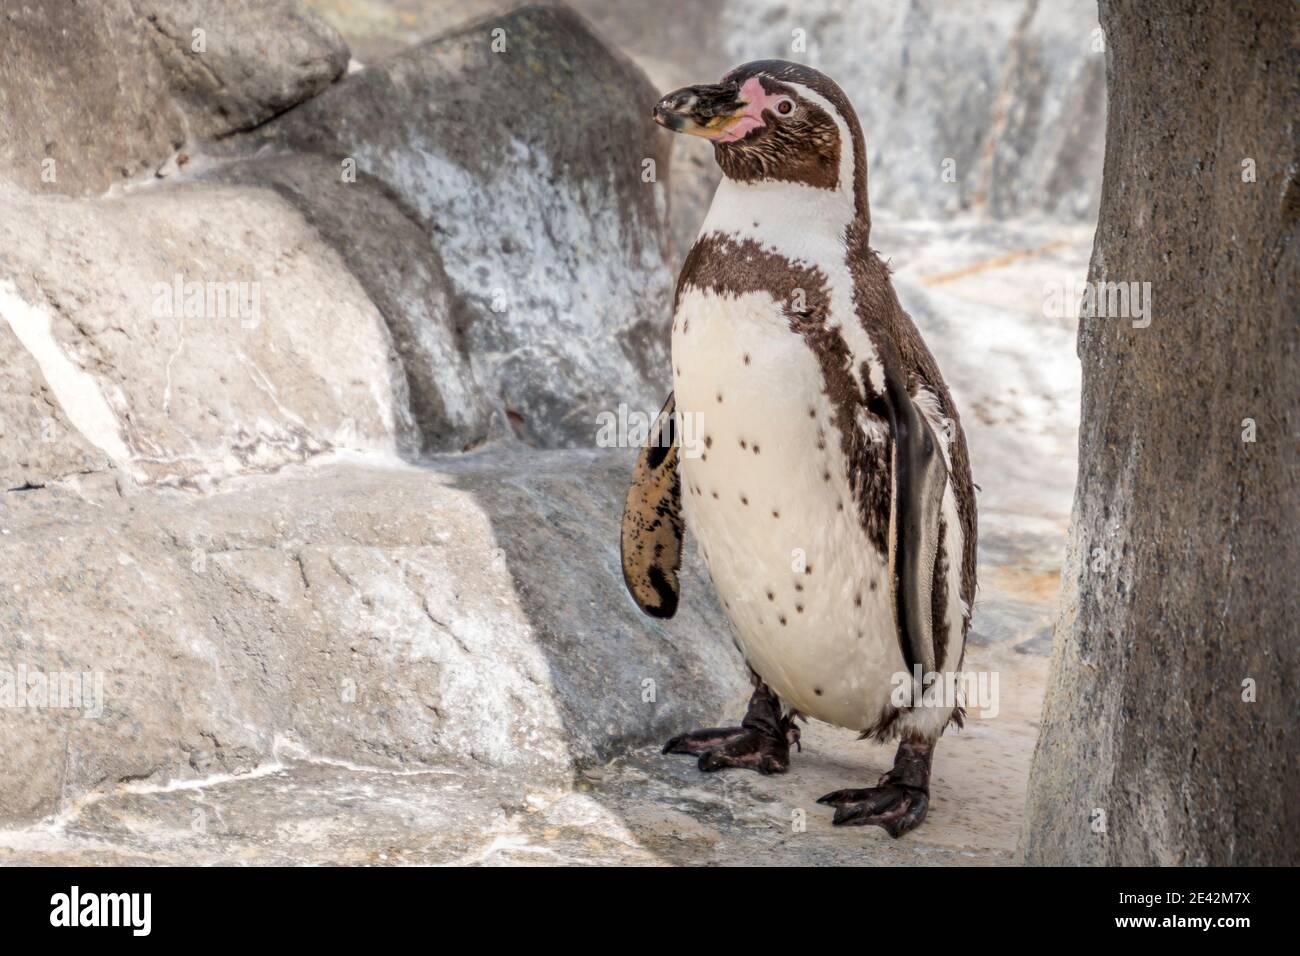 A Humboldt penguin (Spheniscus humboldti) also called Peruvian Penguin or Patranca on the rocks of a cliff Stock Photo